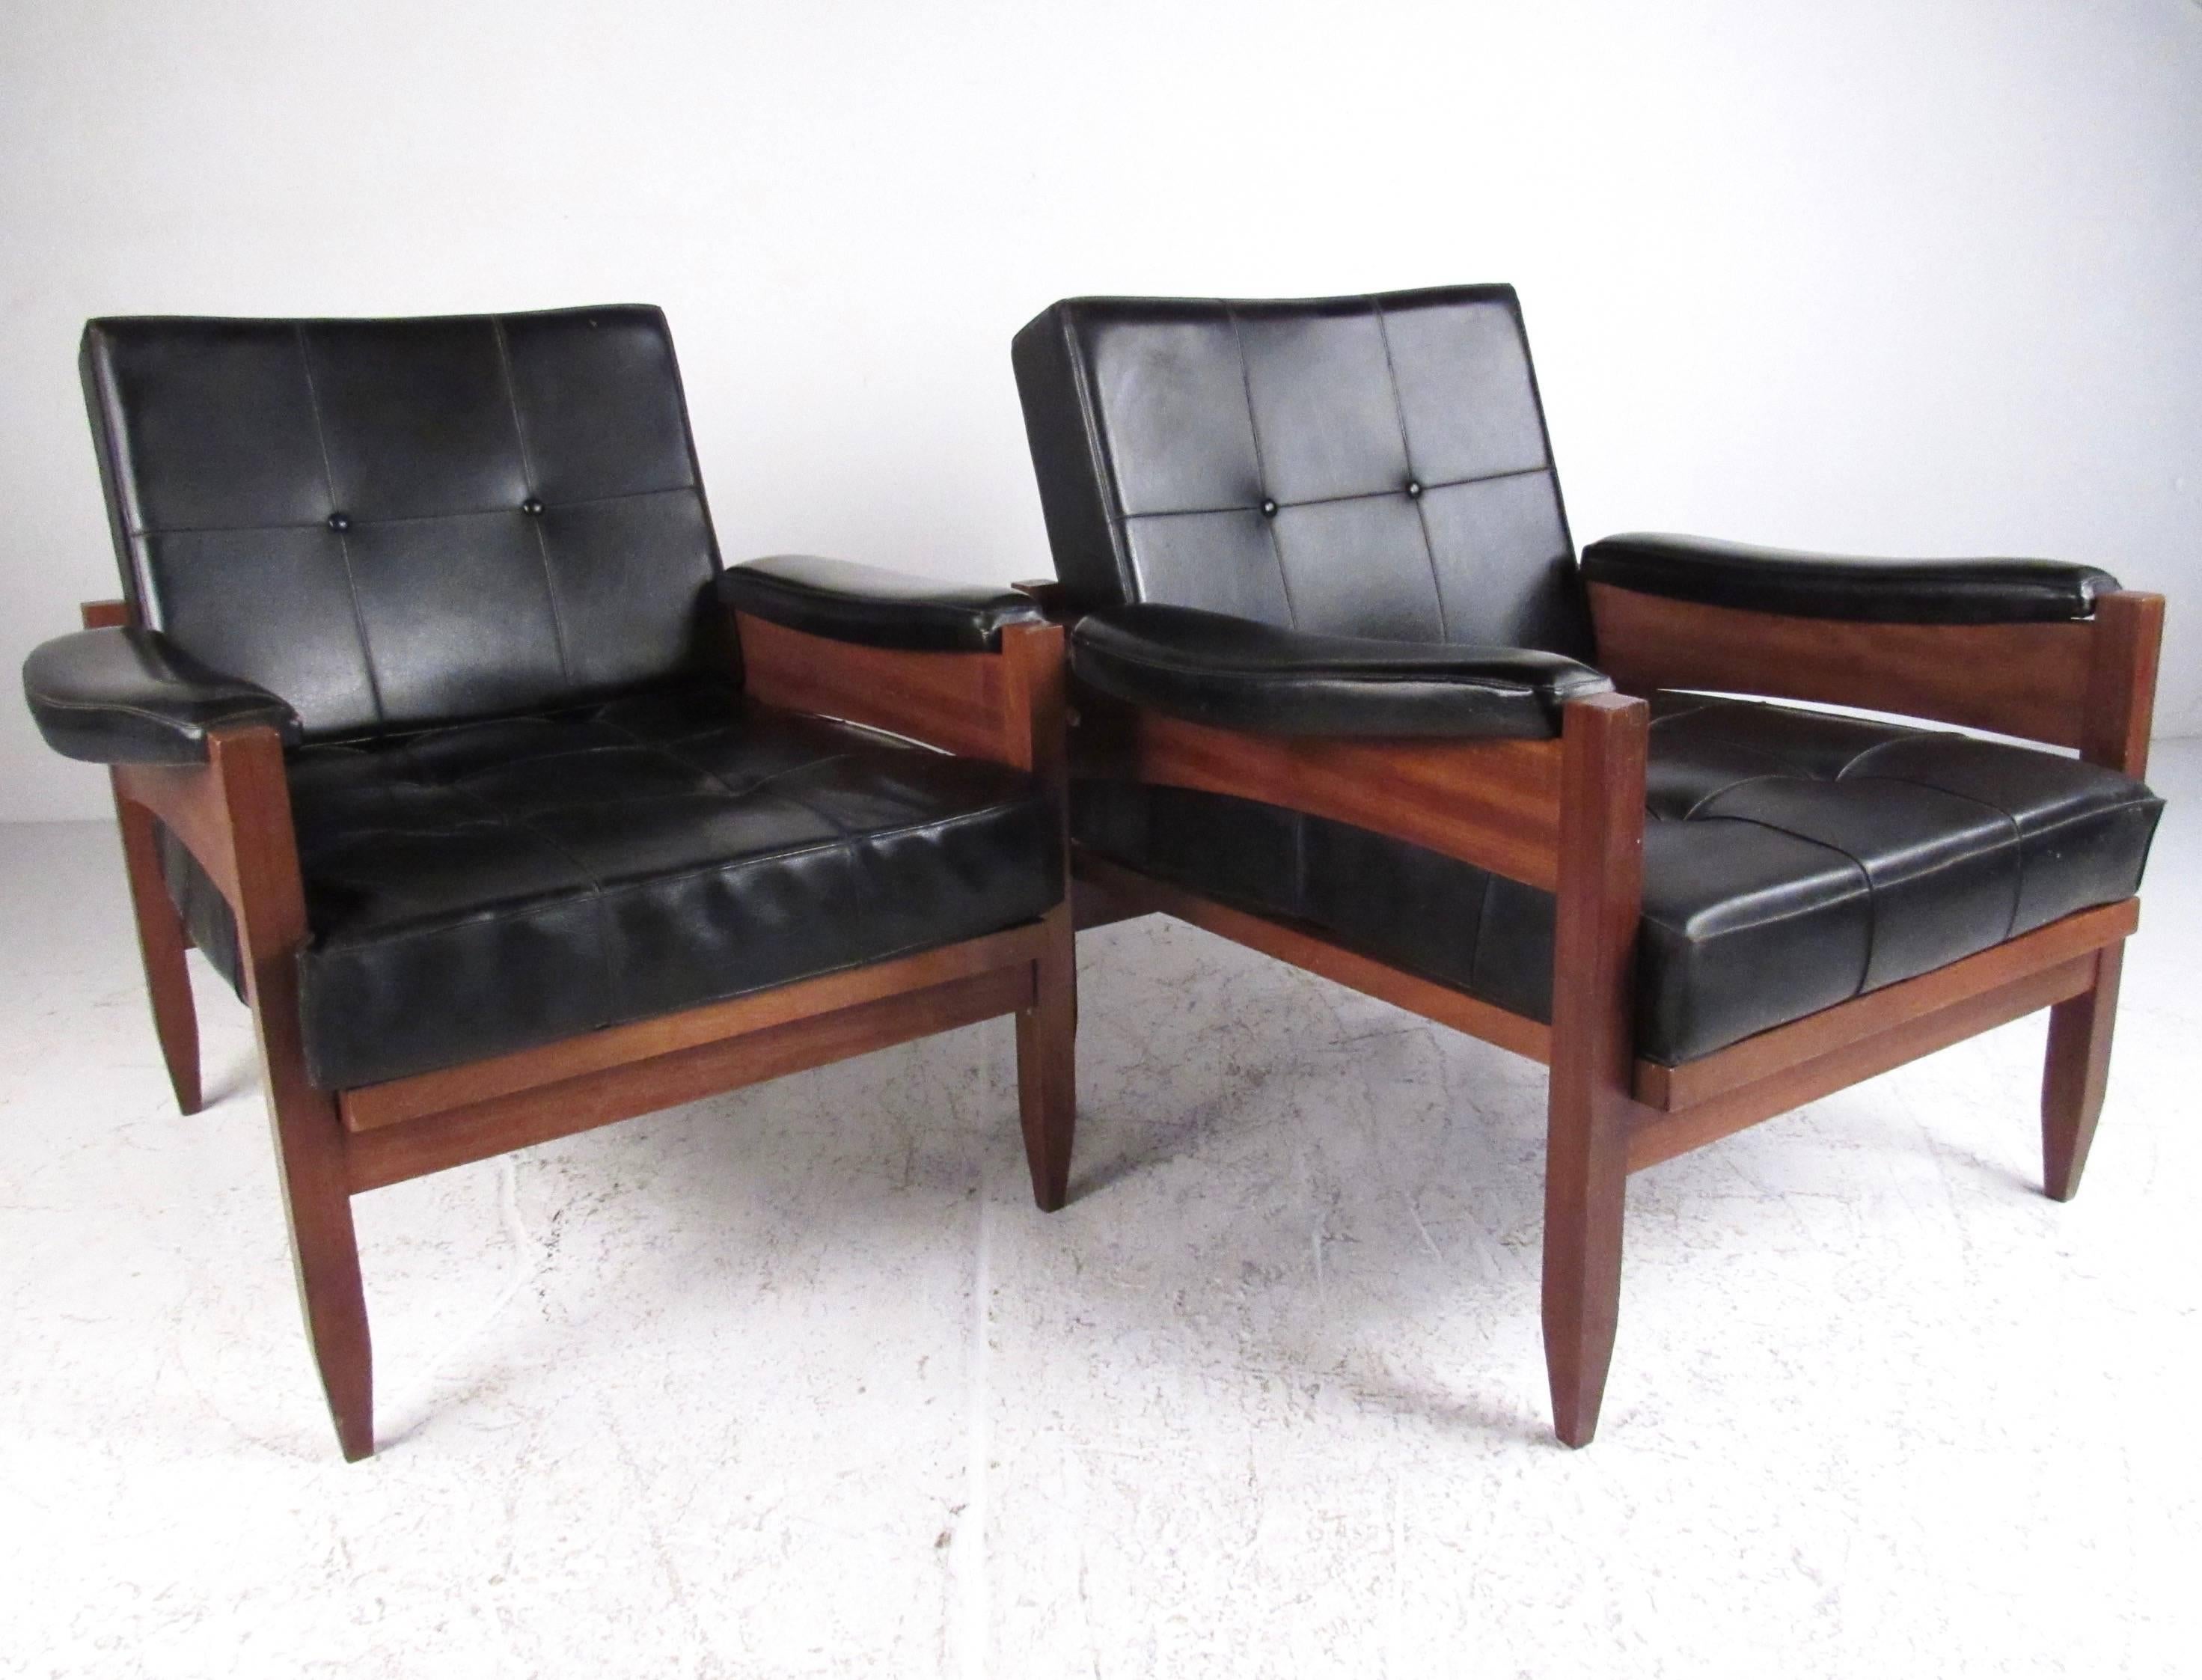 This stylish pair of Mid-Century club chairs features tufted vinyl upholstery with sturdy teak frames. The Scandinavian design cues on this vintage pair of chairs add distinction to any setting, in addition to offering impressive comfort and classy